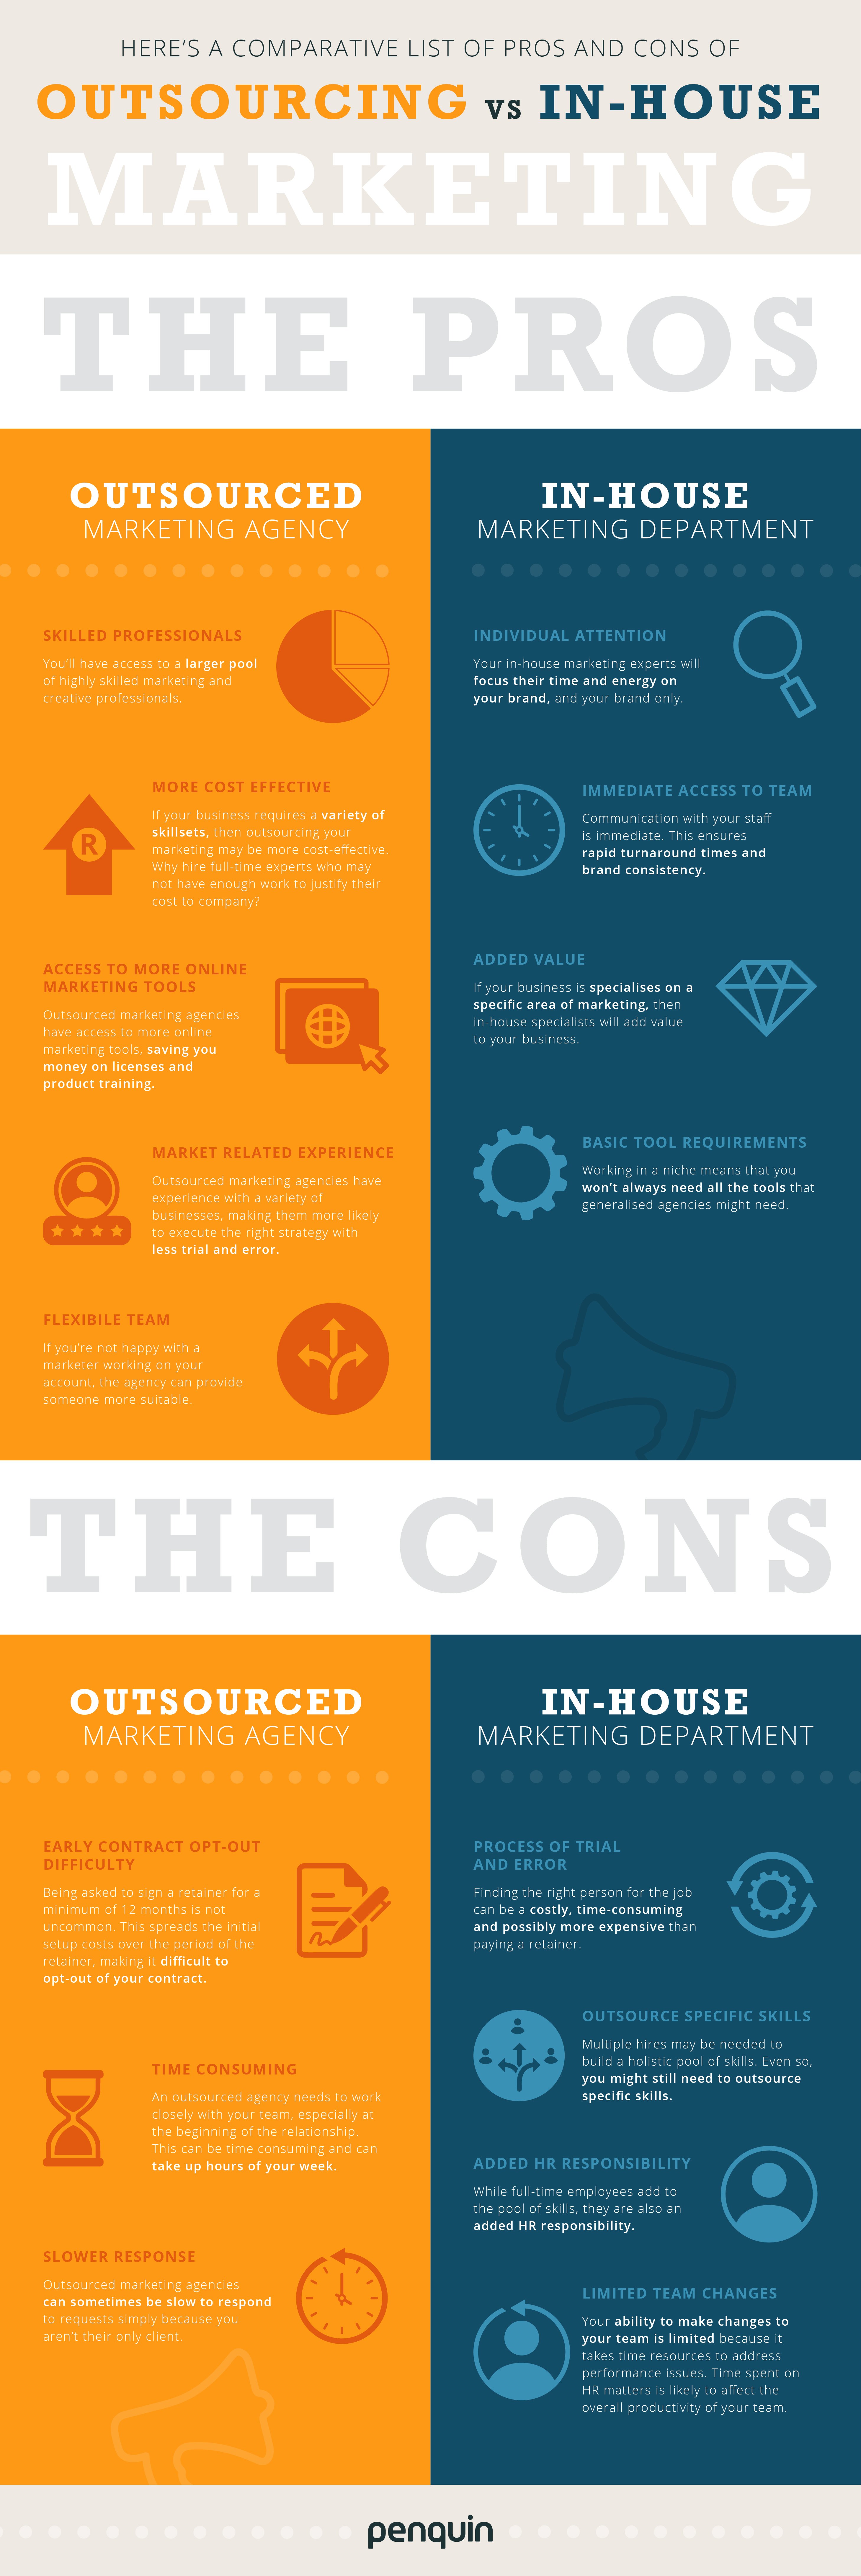 Infographic showing pros and cons of outsourcing vs. in-house marketing agencies